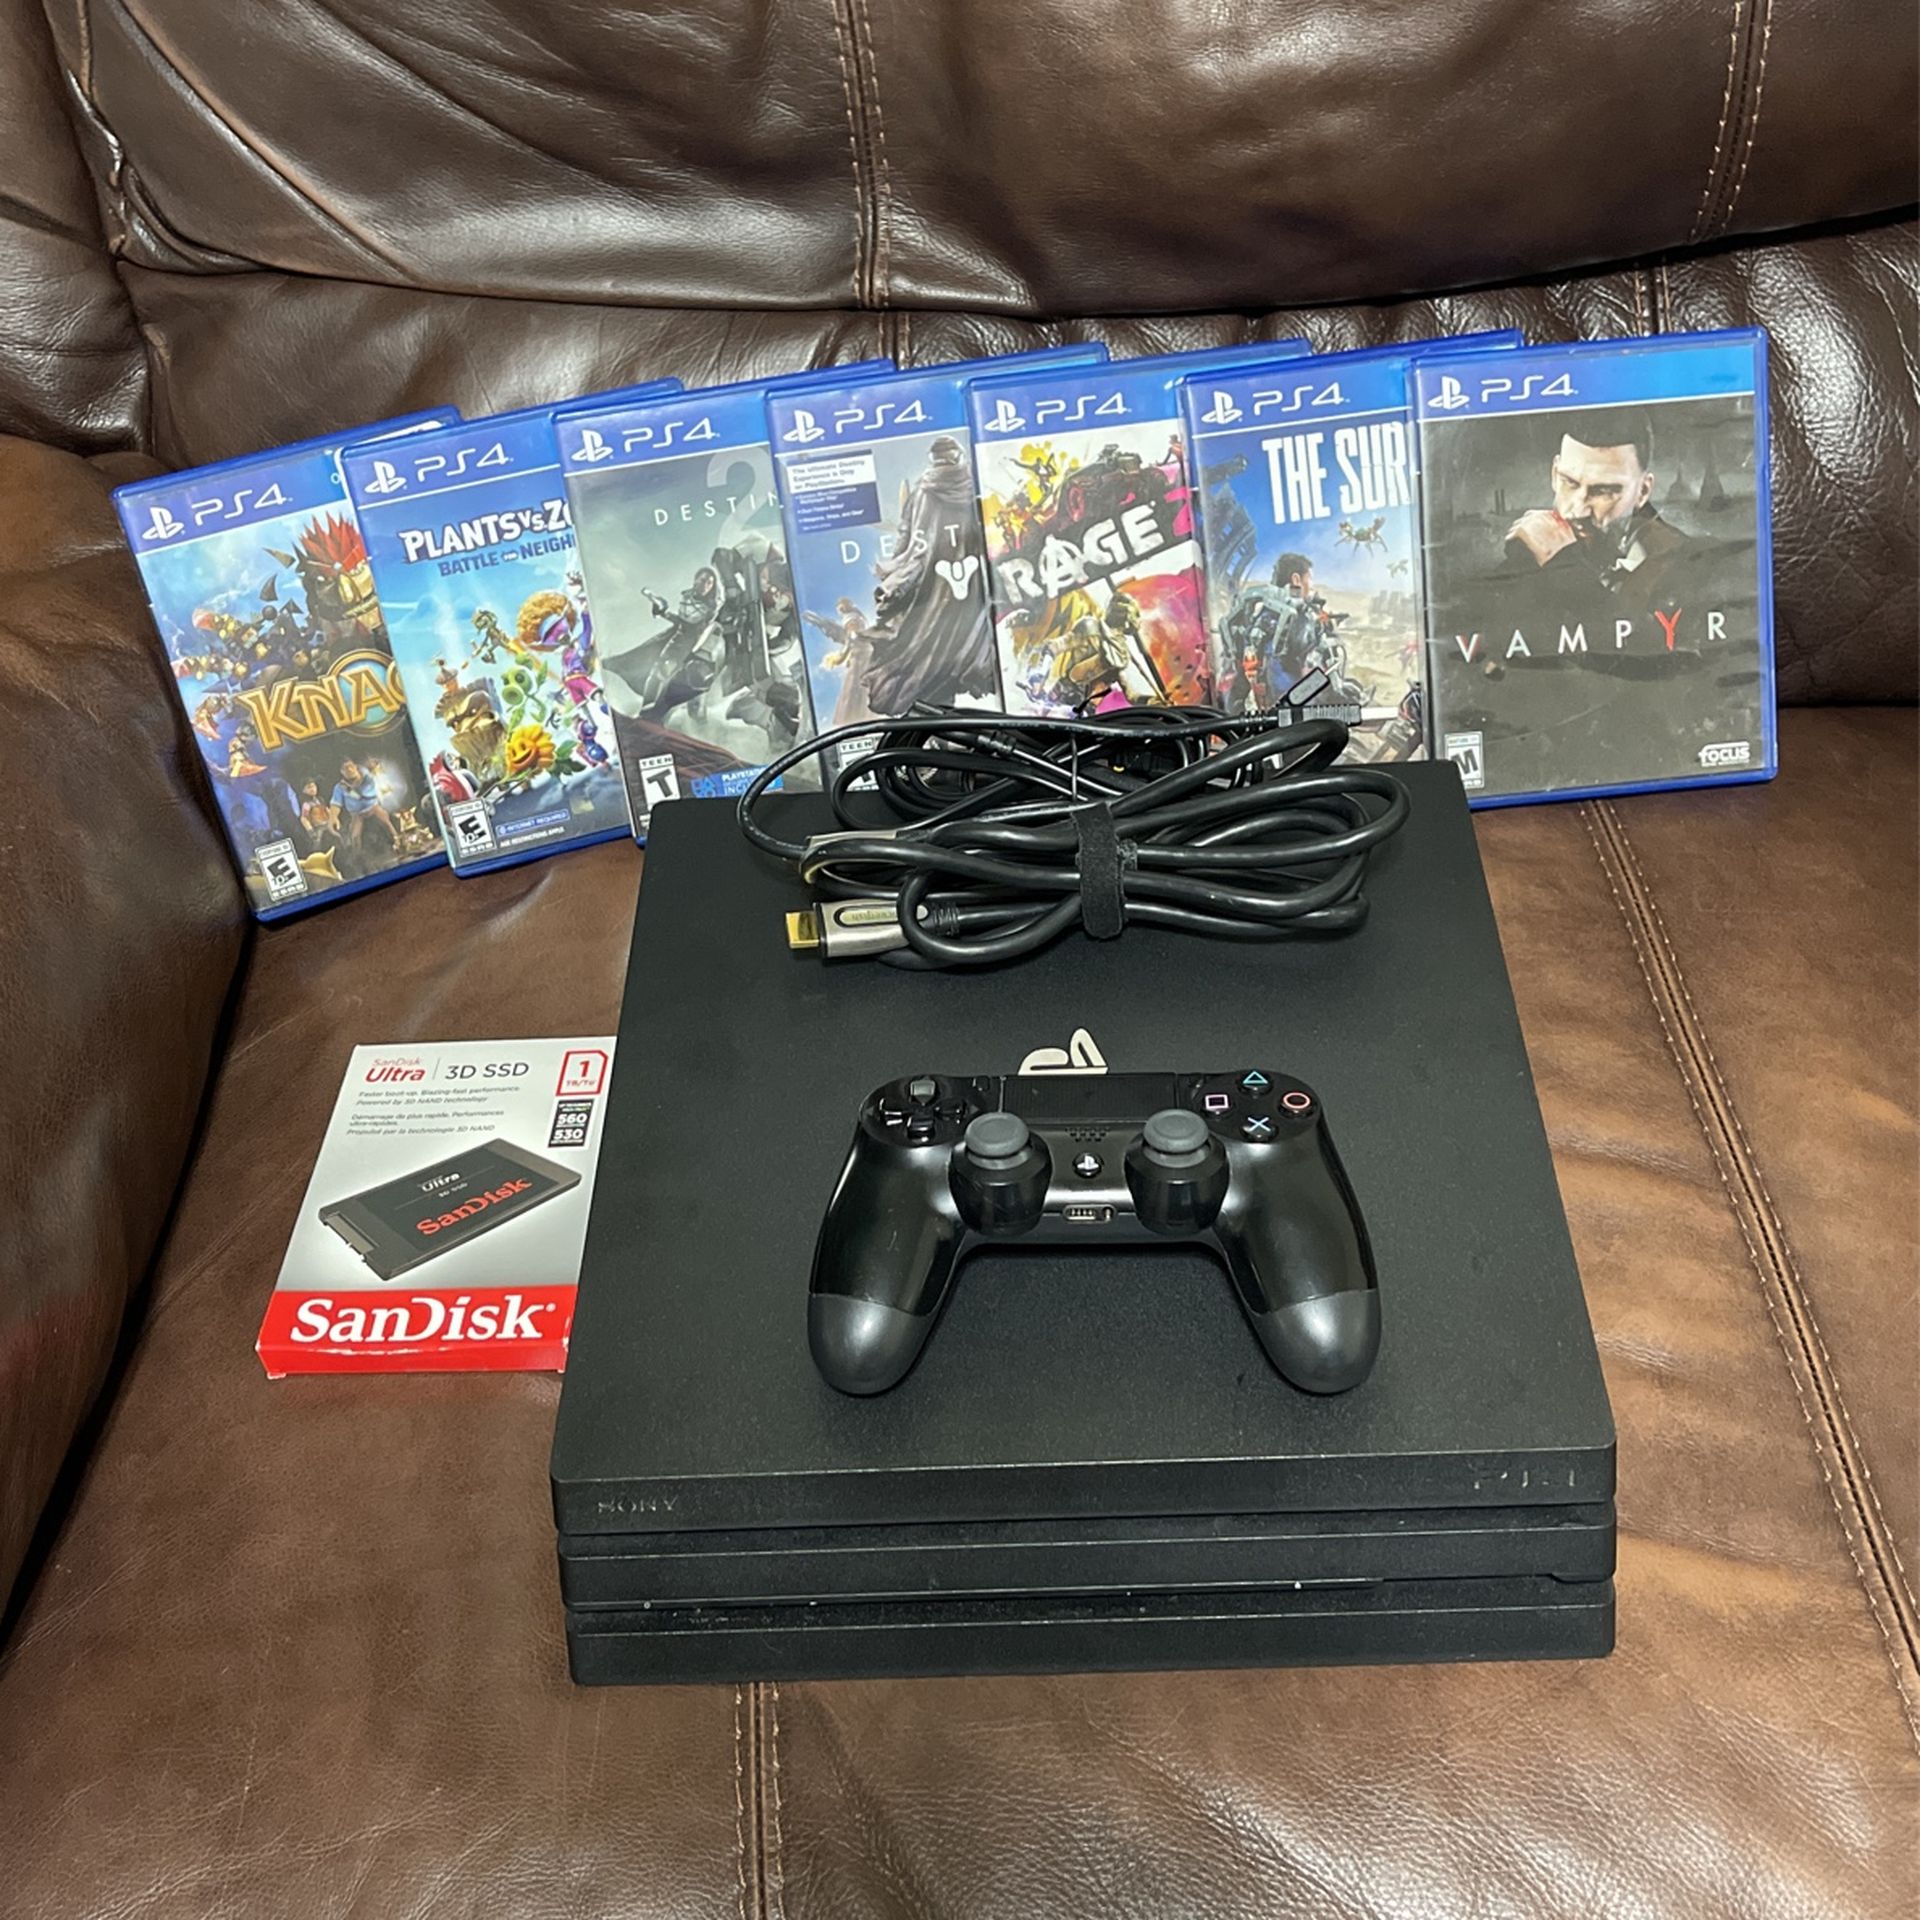 ***REDUCED*** PS4 Pro With Controller - 1 TB SanDisk Ultra 3D SSD Upgrade *$250